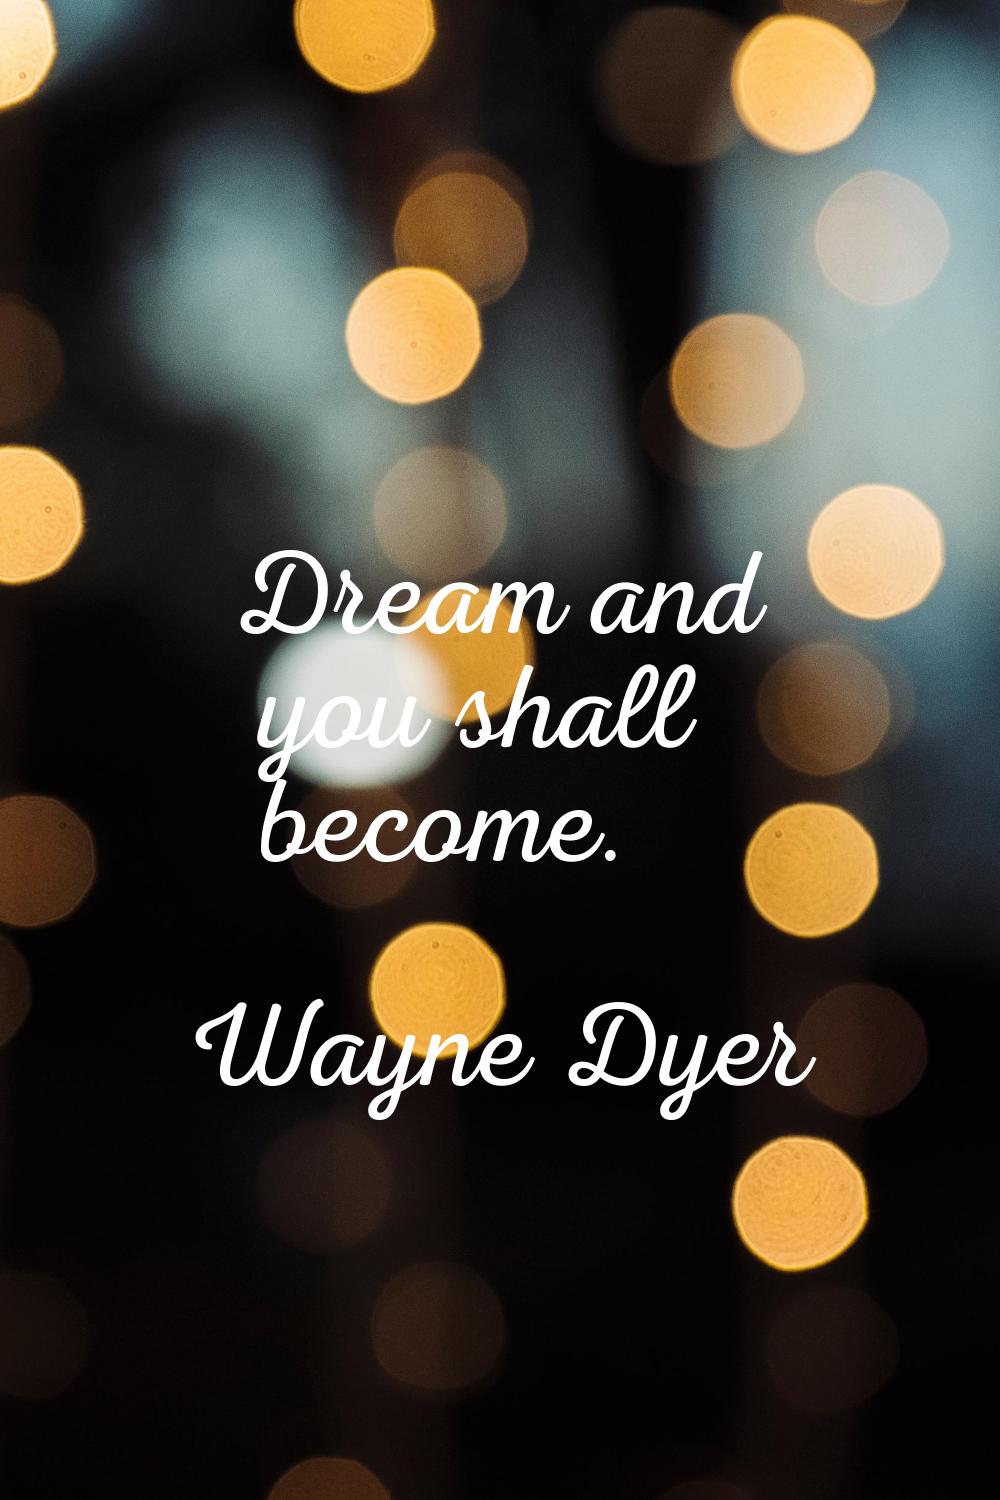 Dream and you shall become.